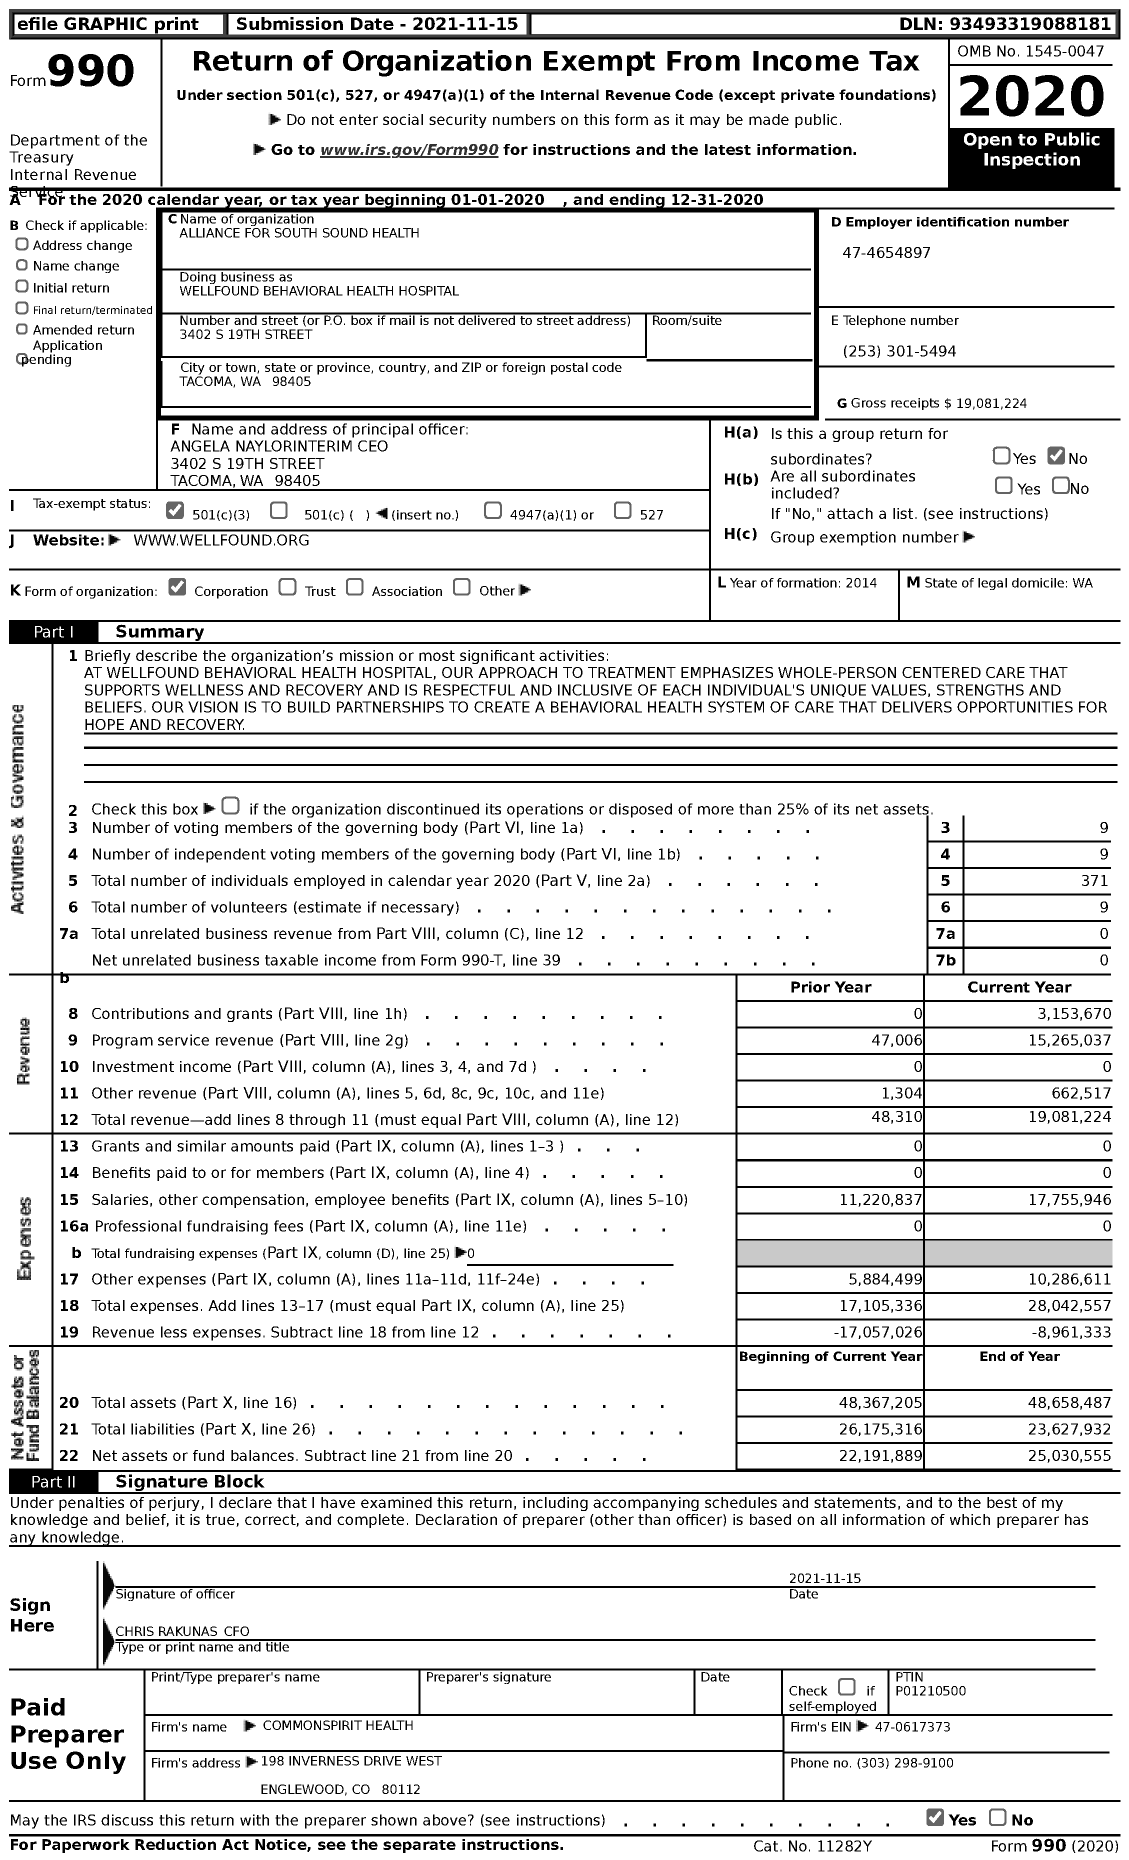 Image of first page of 2020 Form 990 for Wellfound Behavioral Health Hospital